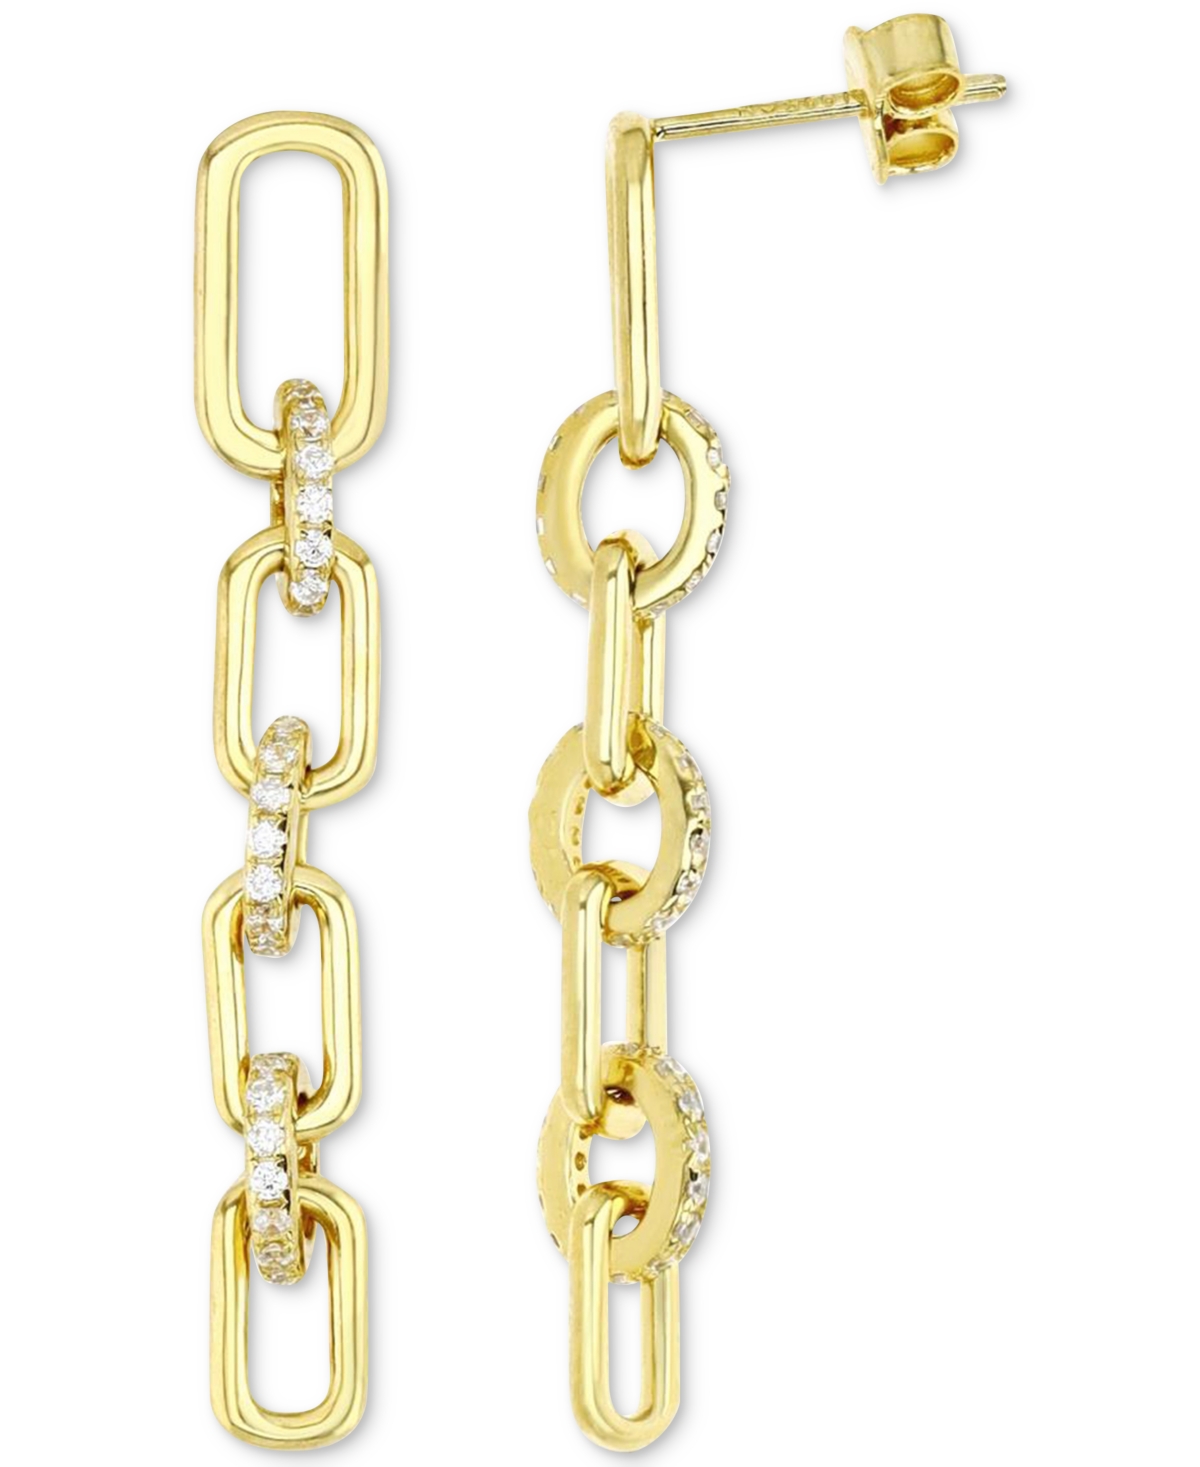 Cubic Zirconia Polished Chain Link Linear Drop Earrings in 14k Gold-Plated Sterling Silver - Gold